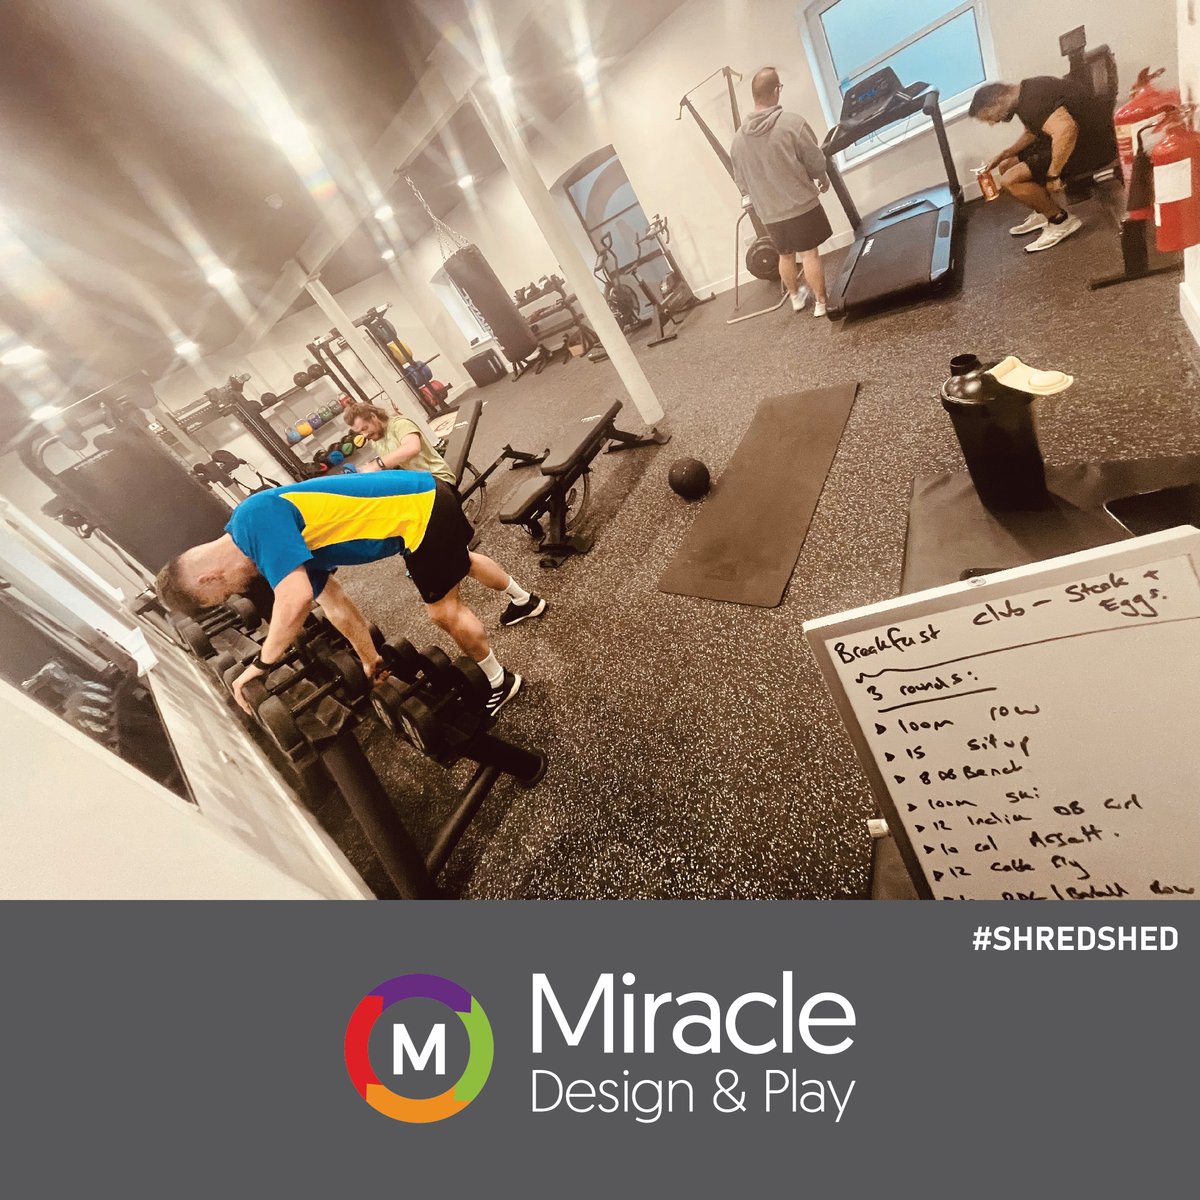 Some members of the Miracle mob had an early start in the office gym for a circuit training session to kickstart their day on a positive note.
It's inspiring to see the dedication and commitment that our team members have.
 #ShredShed #MiracleMob #CircuitTraining t #MiracleGrow